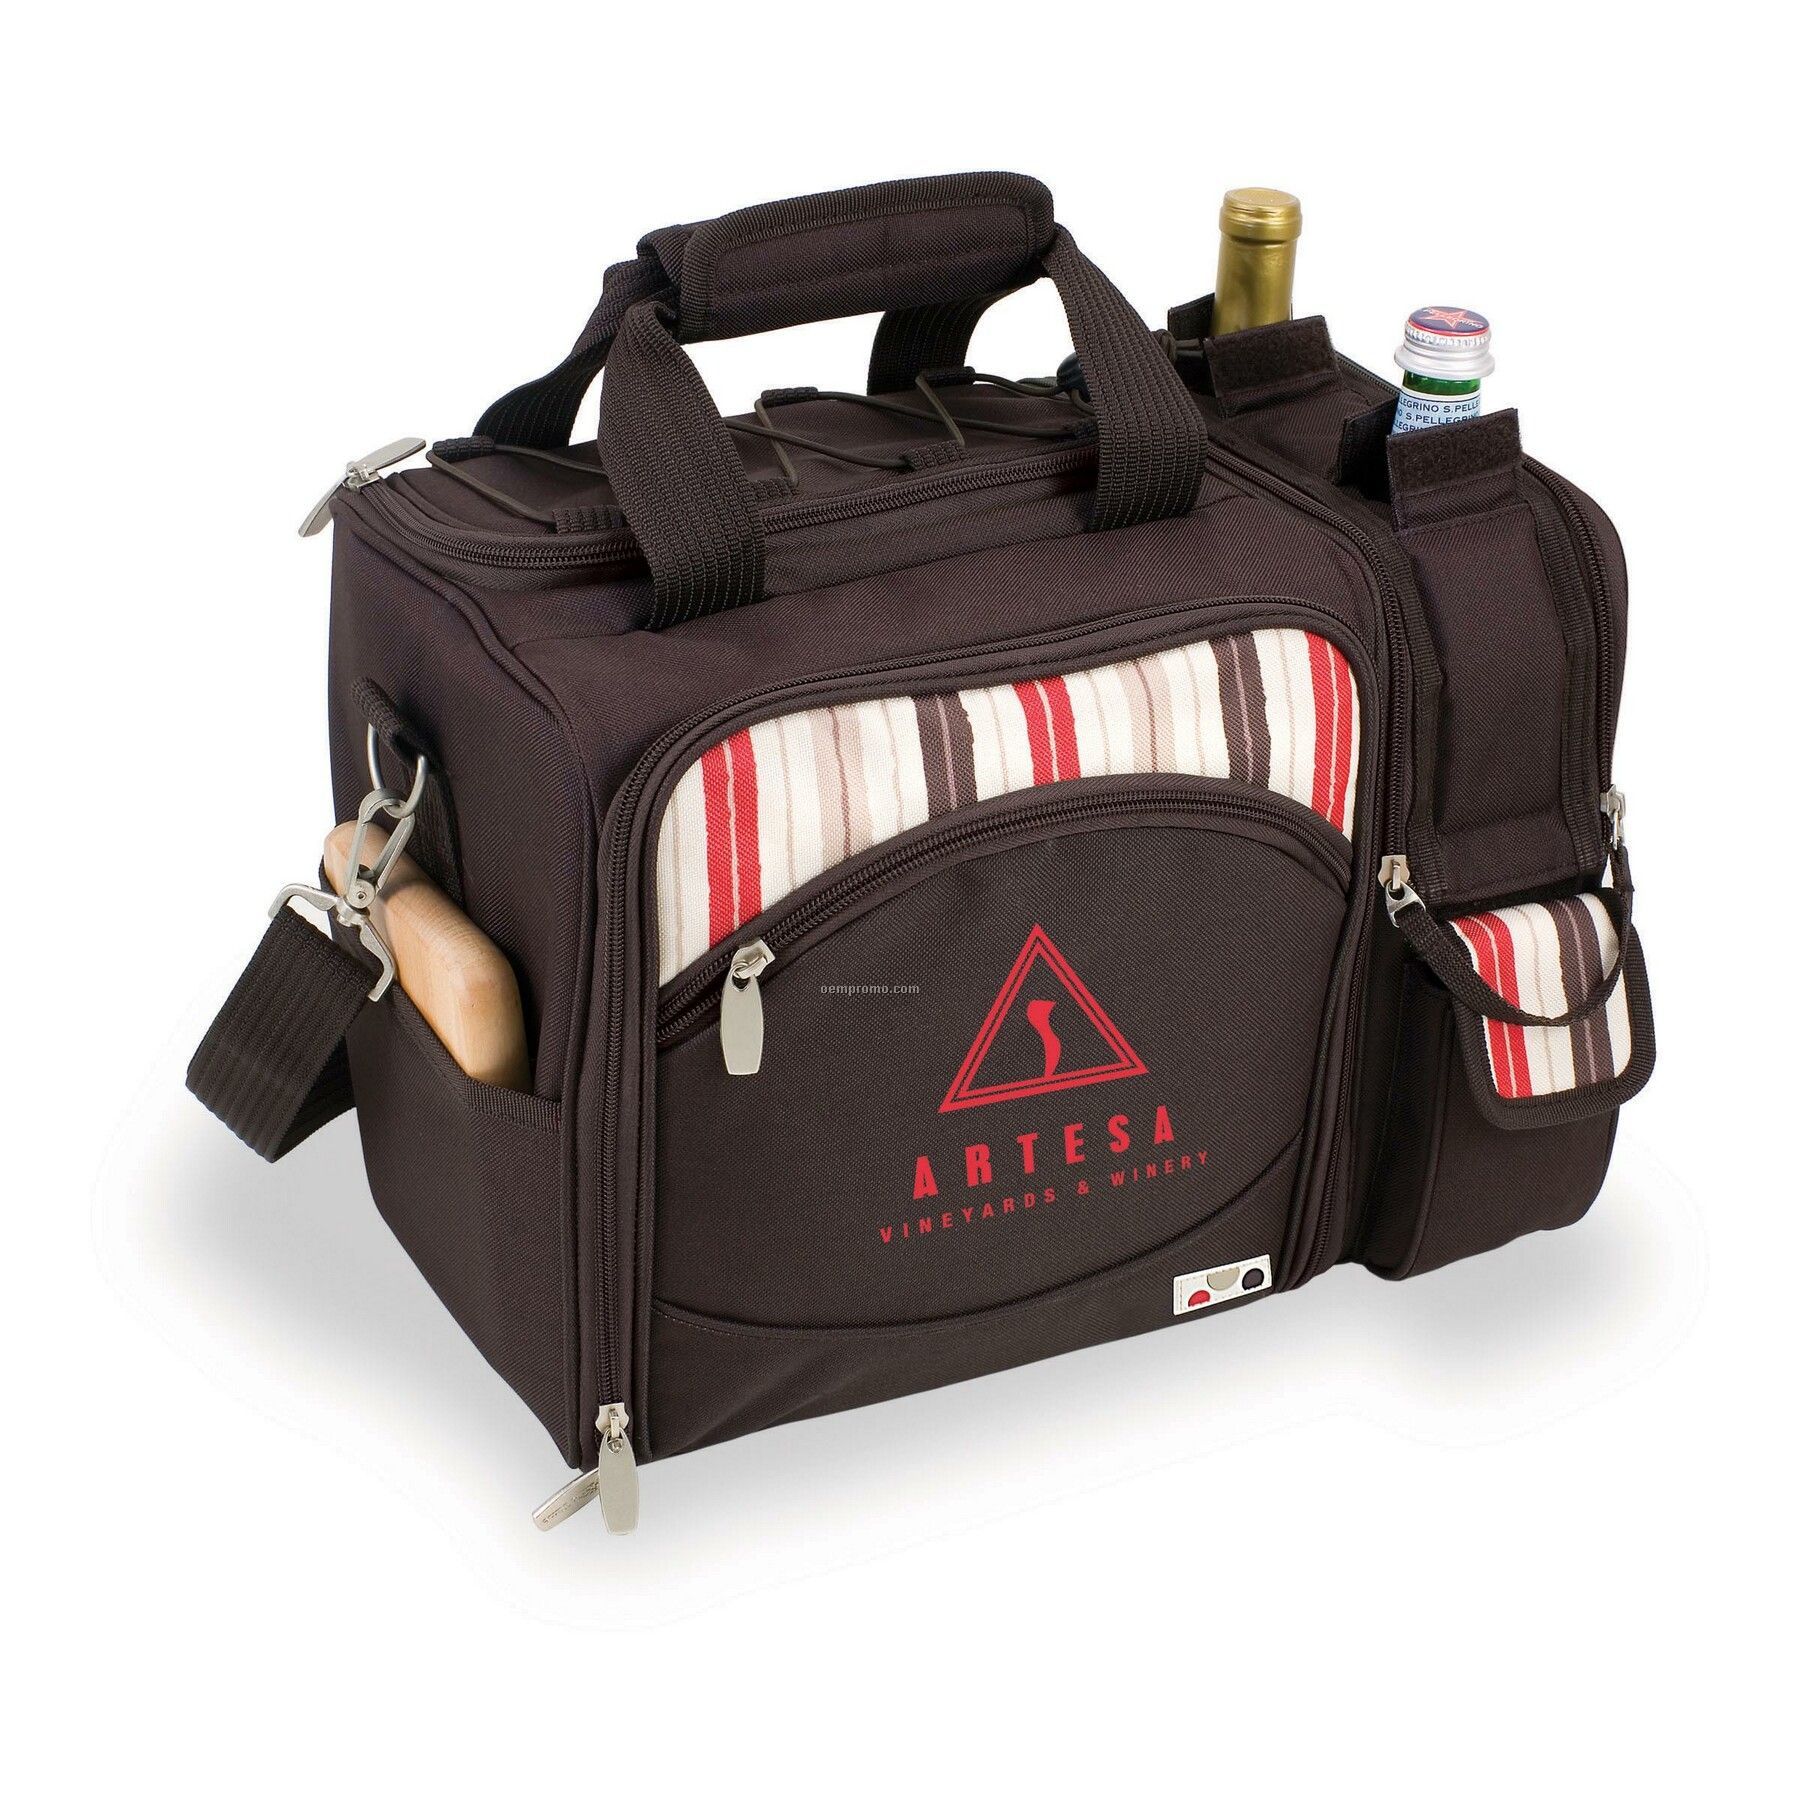 Malibu - Moka Picnic Cooler Shoulder Pack W/ Svc. For 2 - Brown (12 Can)